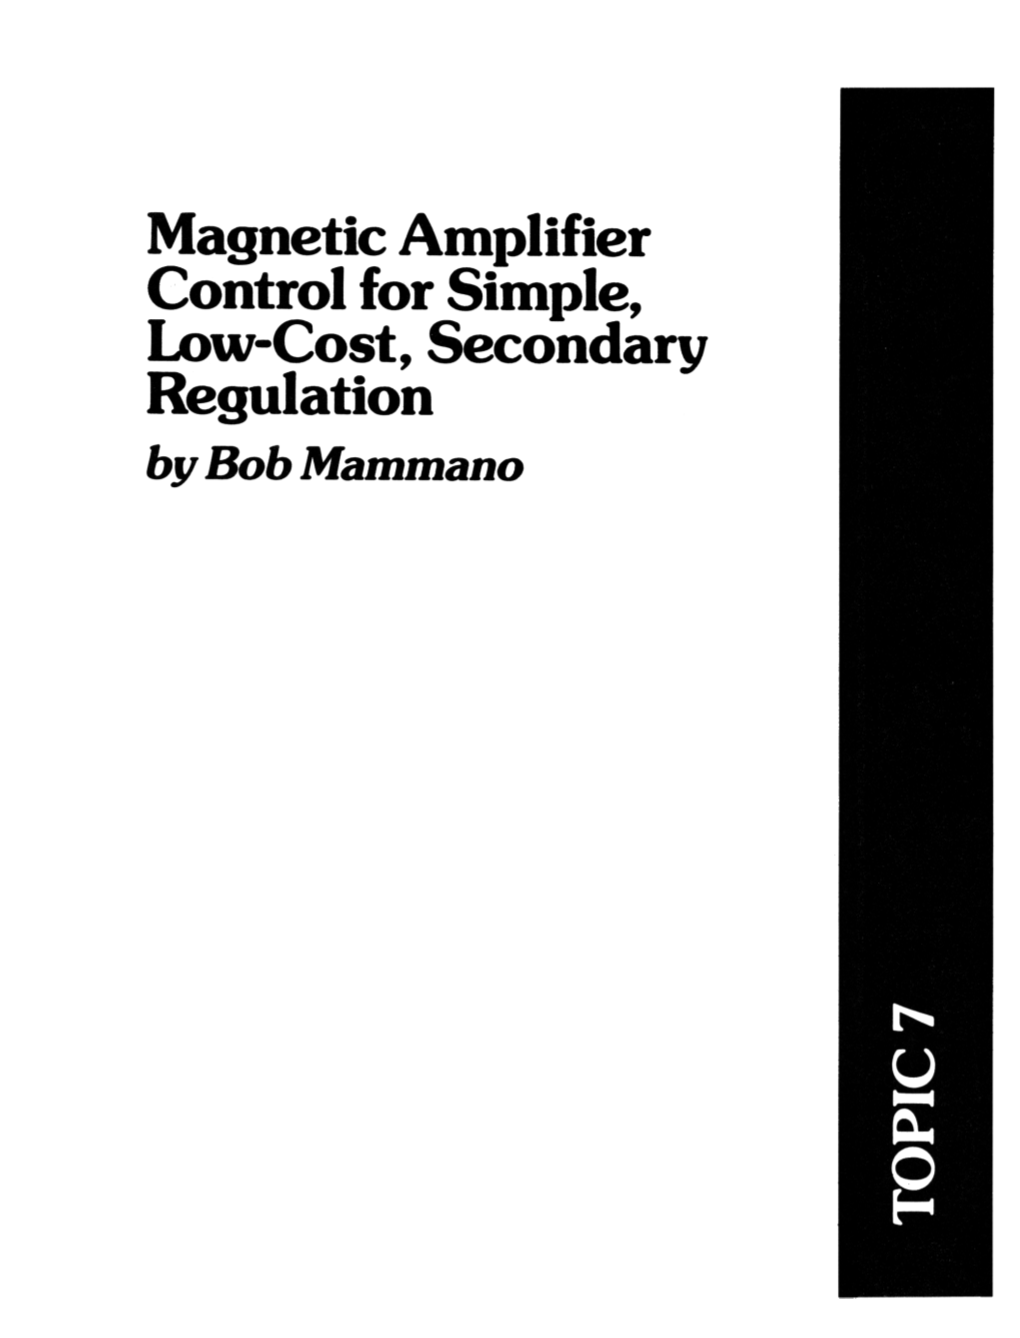 Magnetic Amplifier Control